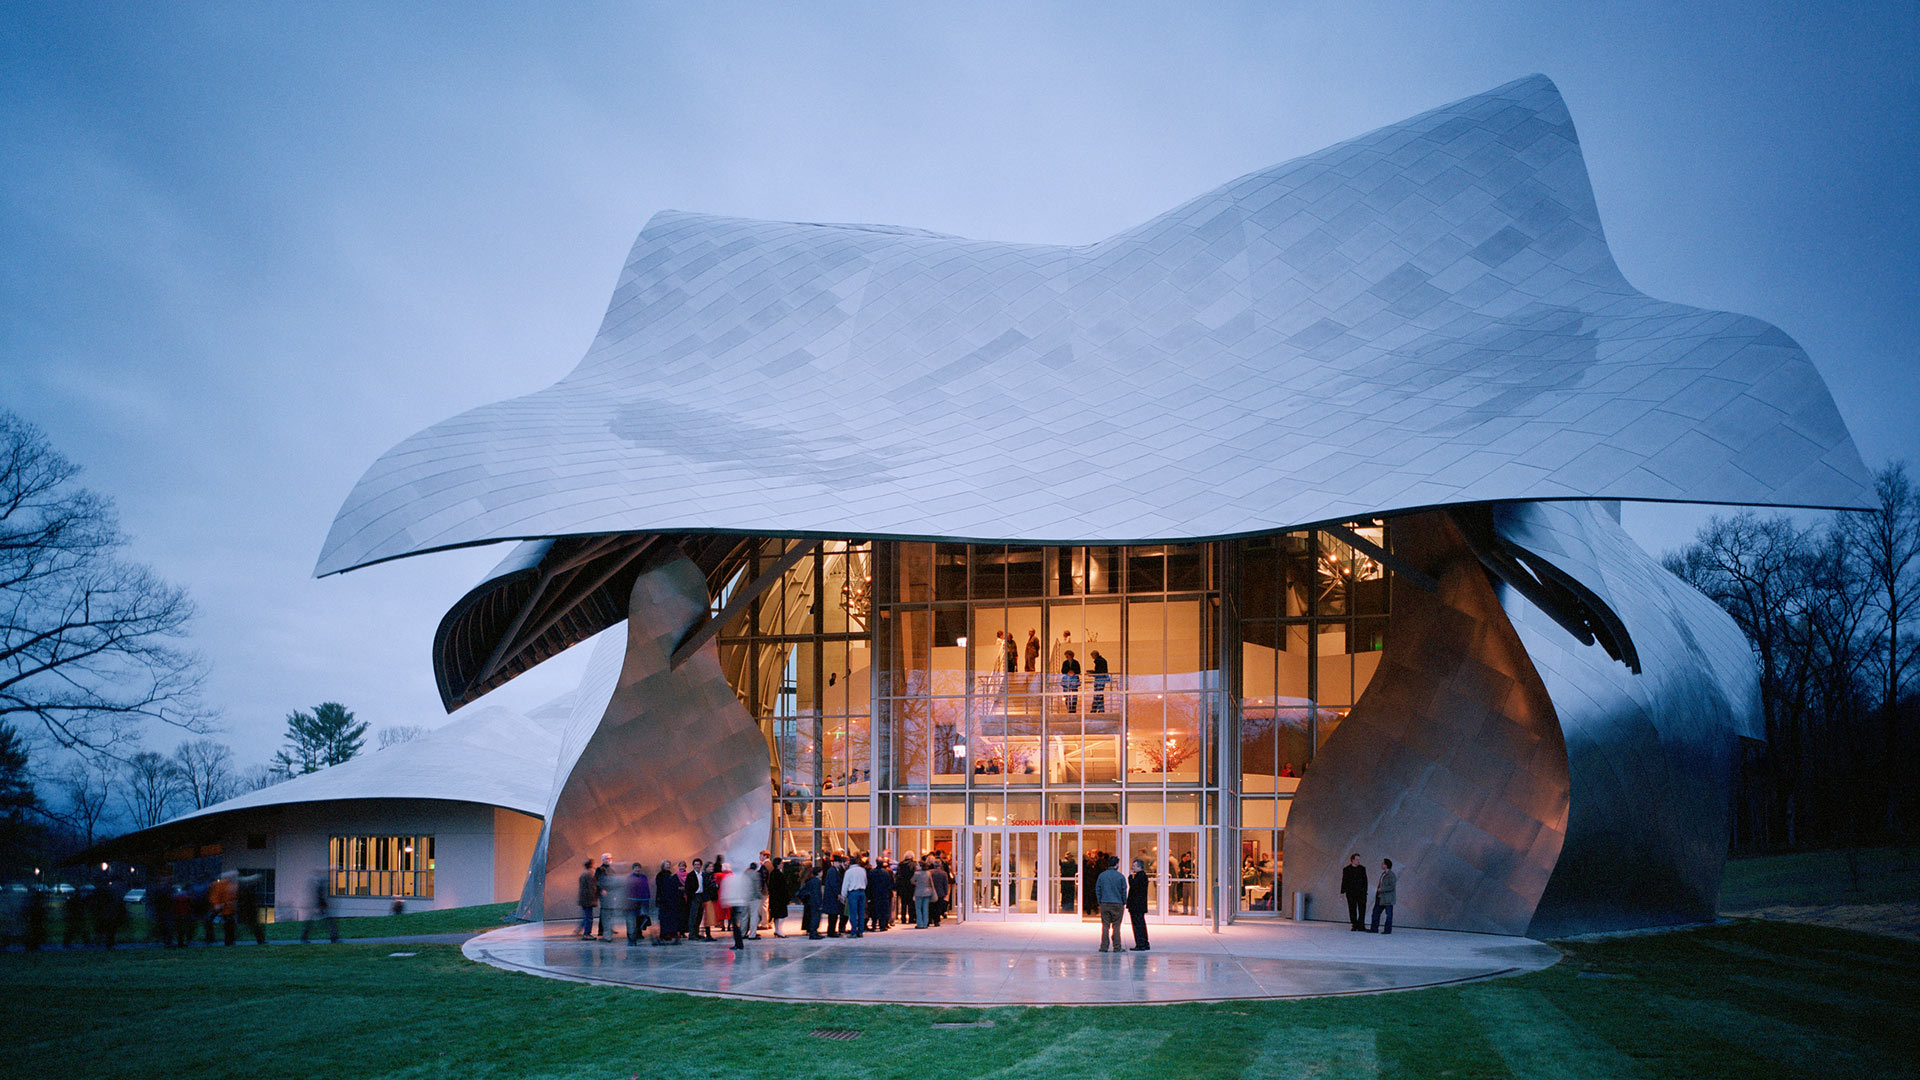 Bard College, Richard B. Fisher Center for the Performing Arts